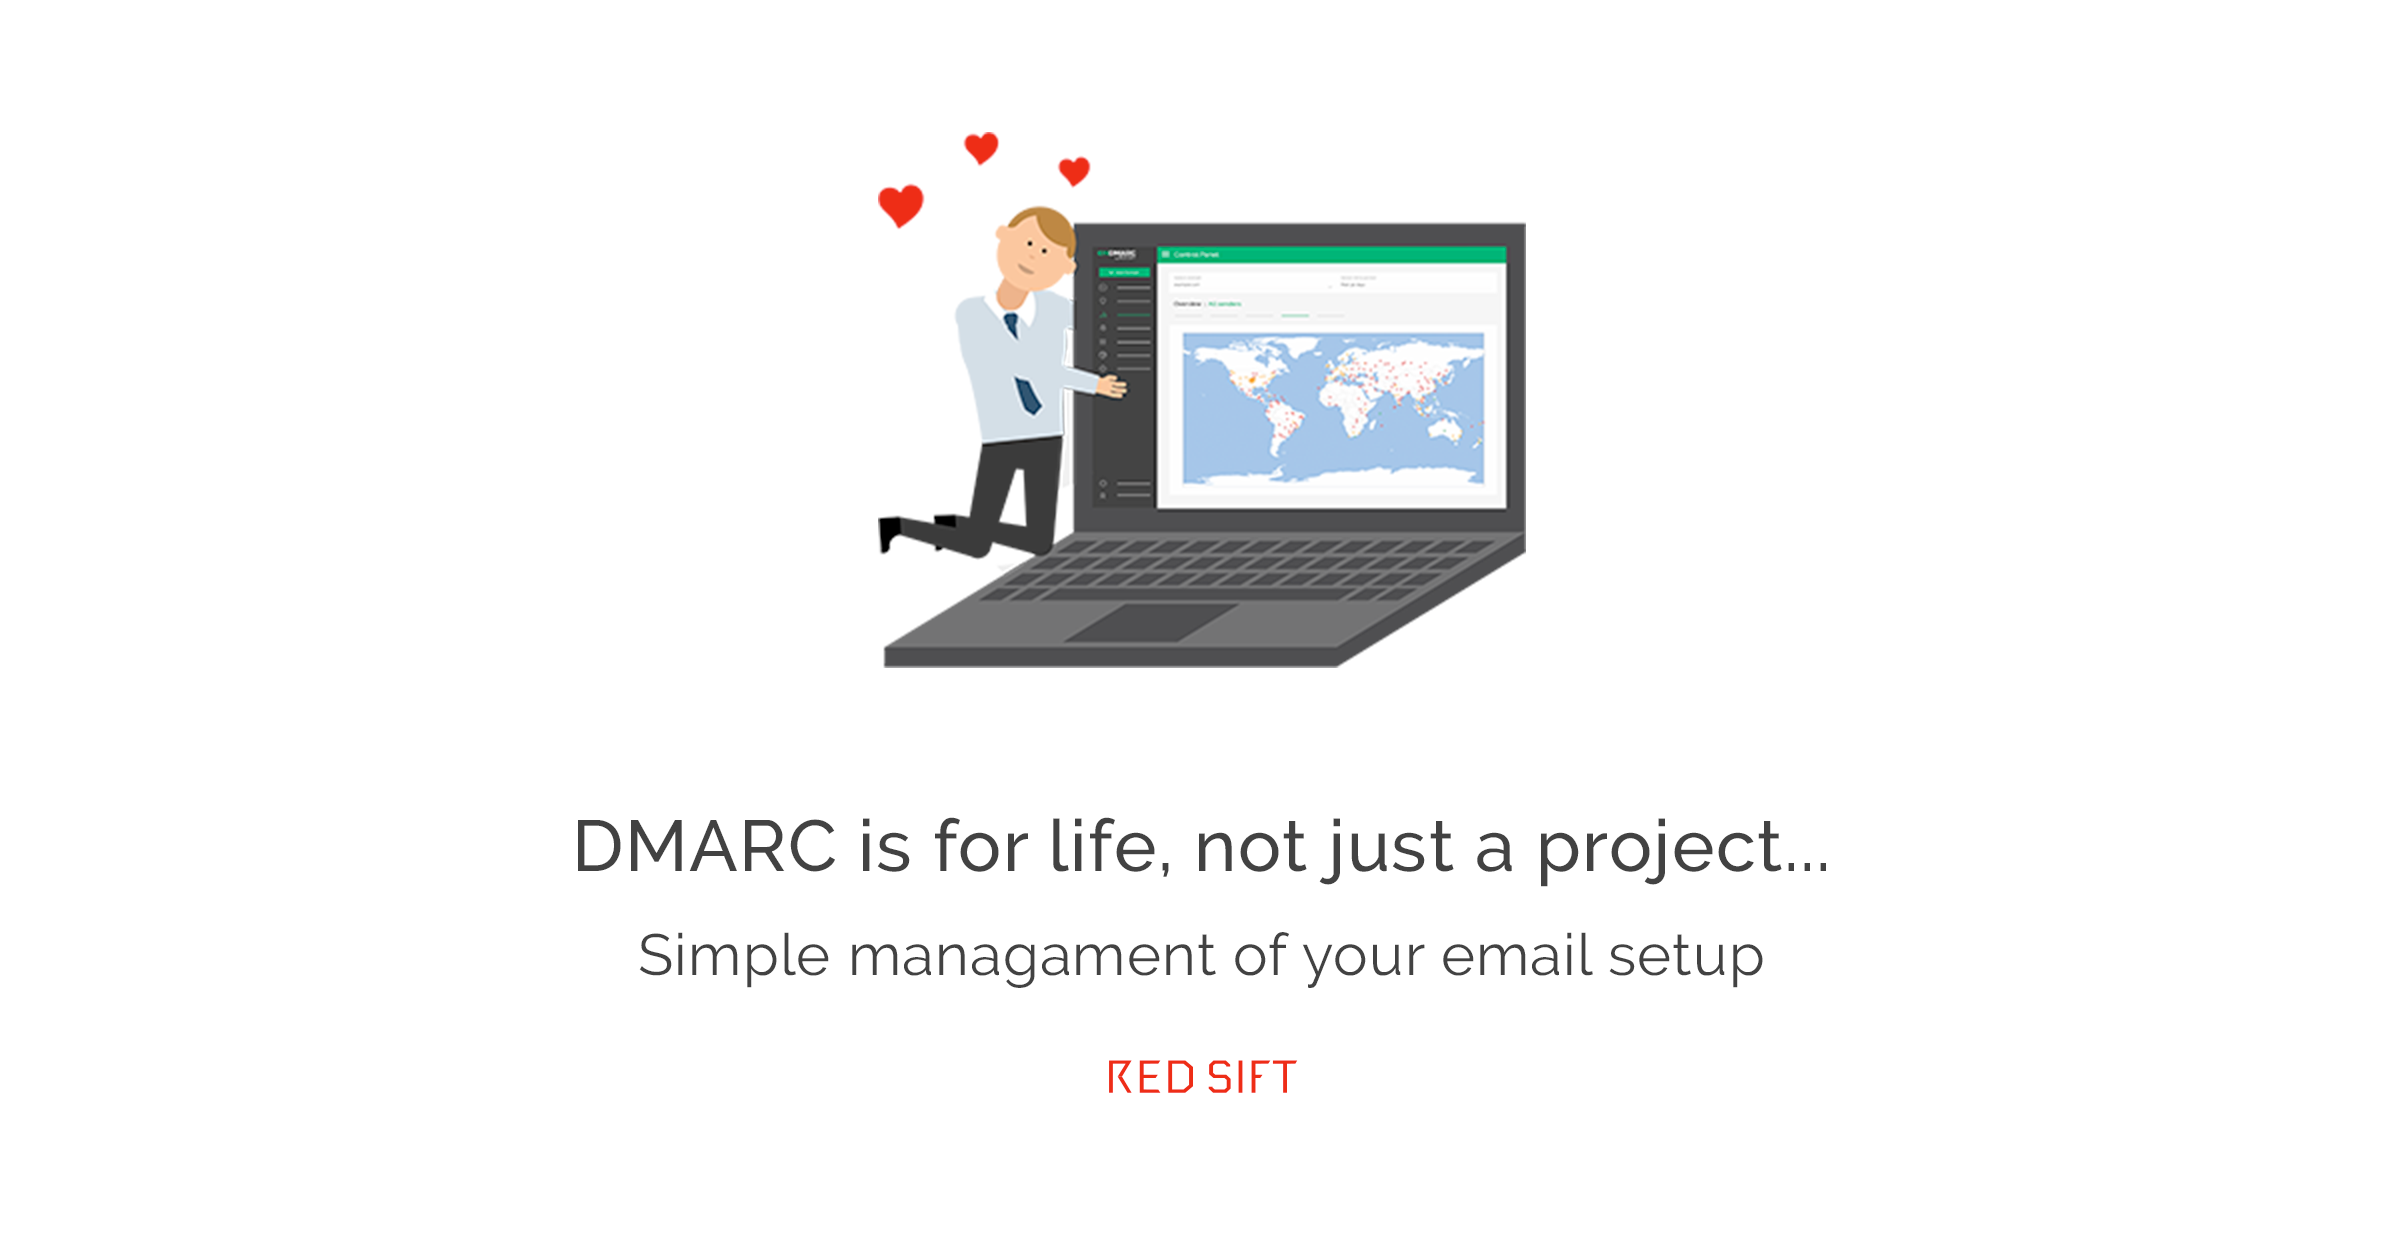 DMARC management should be seen as an ongoing process